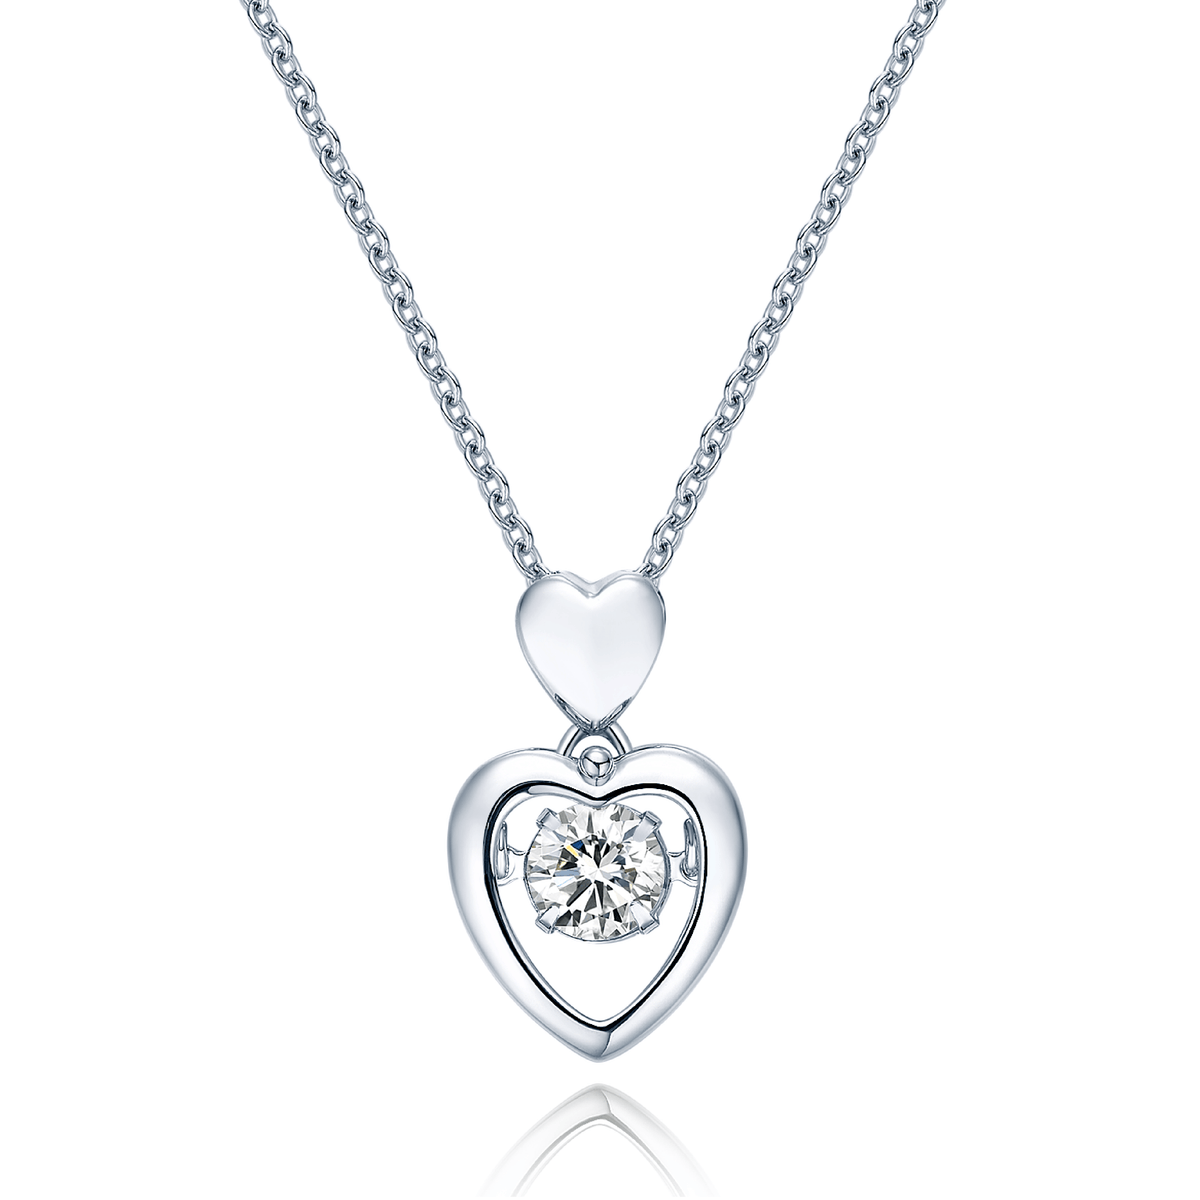 Besito Dancing Heart necklace